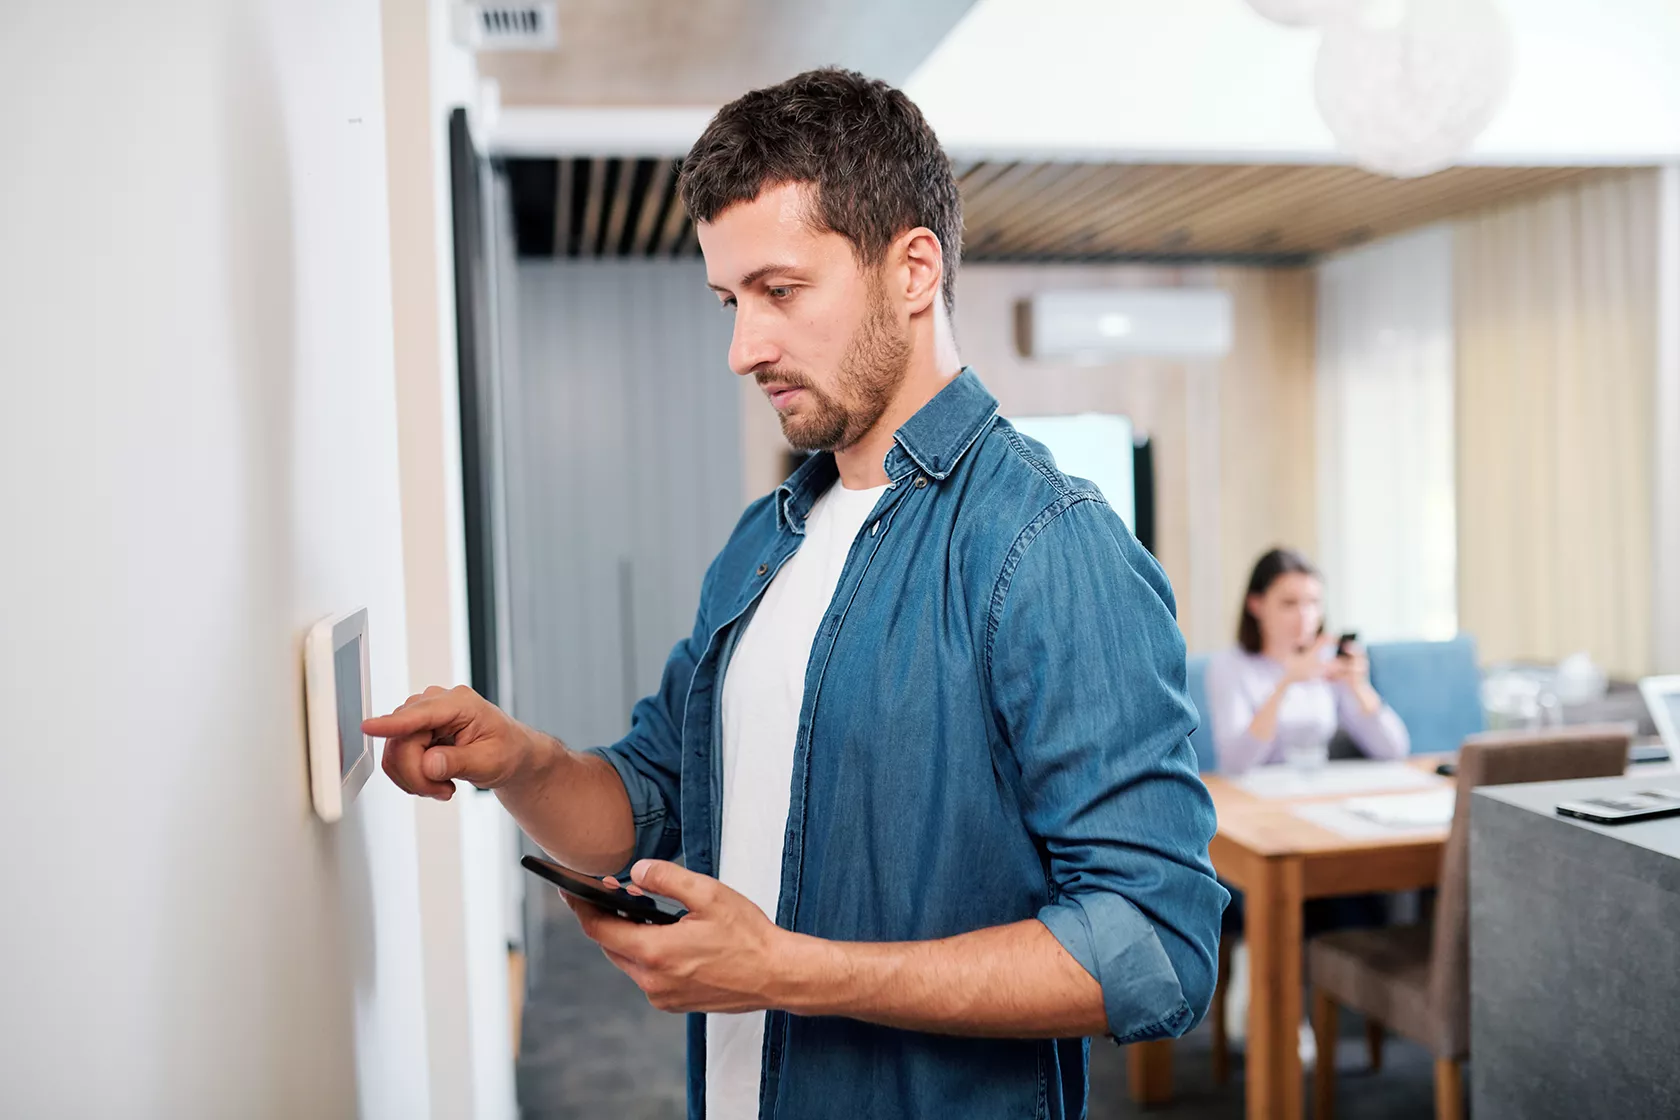 Man changing electronic thermostat settings